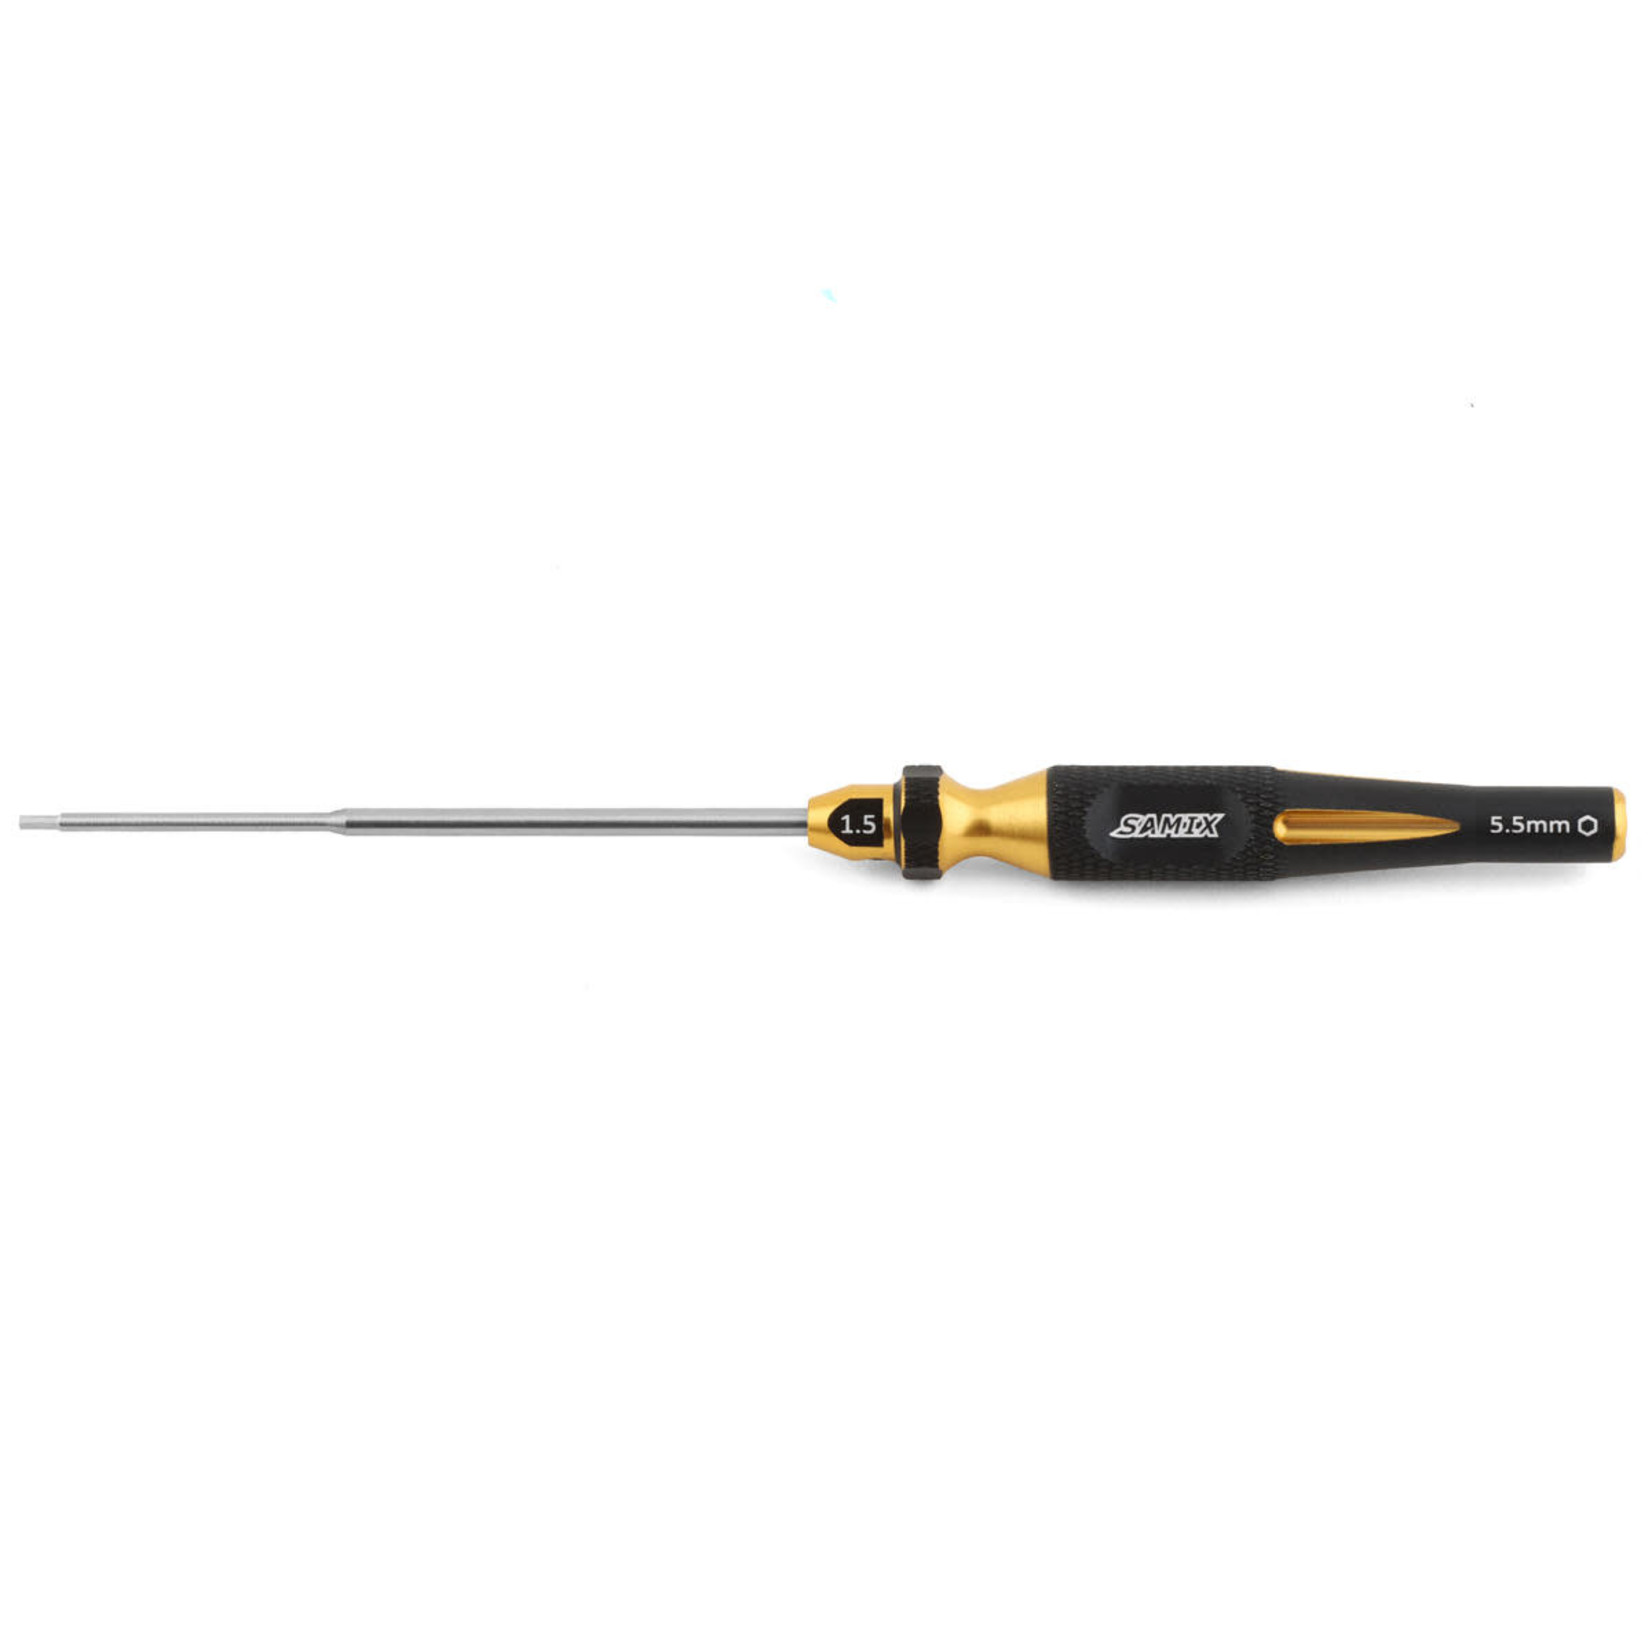 Samix Samix FCX24 2-in-1 Hex Wrench/Nut Driver (Gold) (1.5mm Hex/5.5mm Nut) #SAMFCX24-SD15